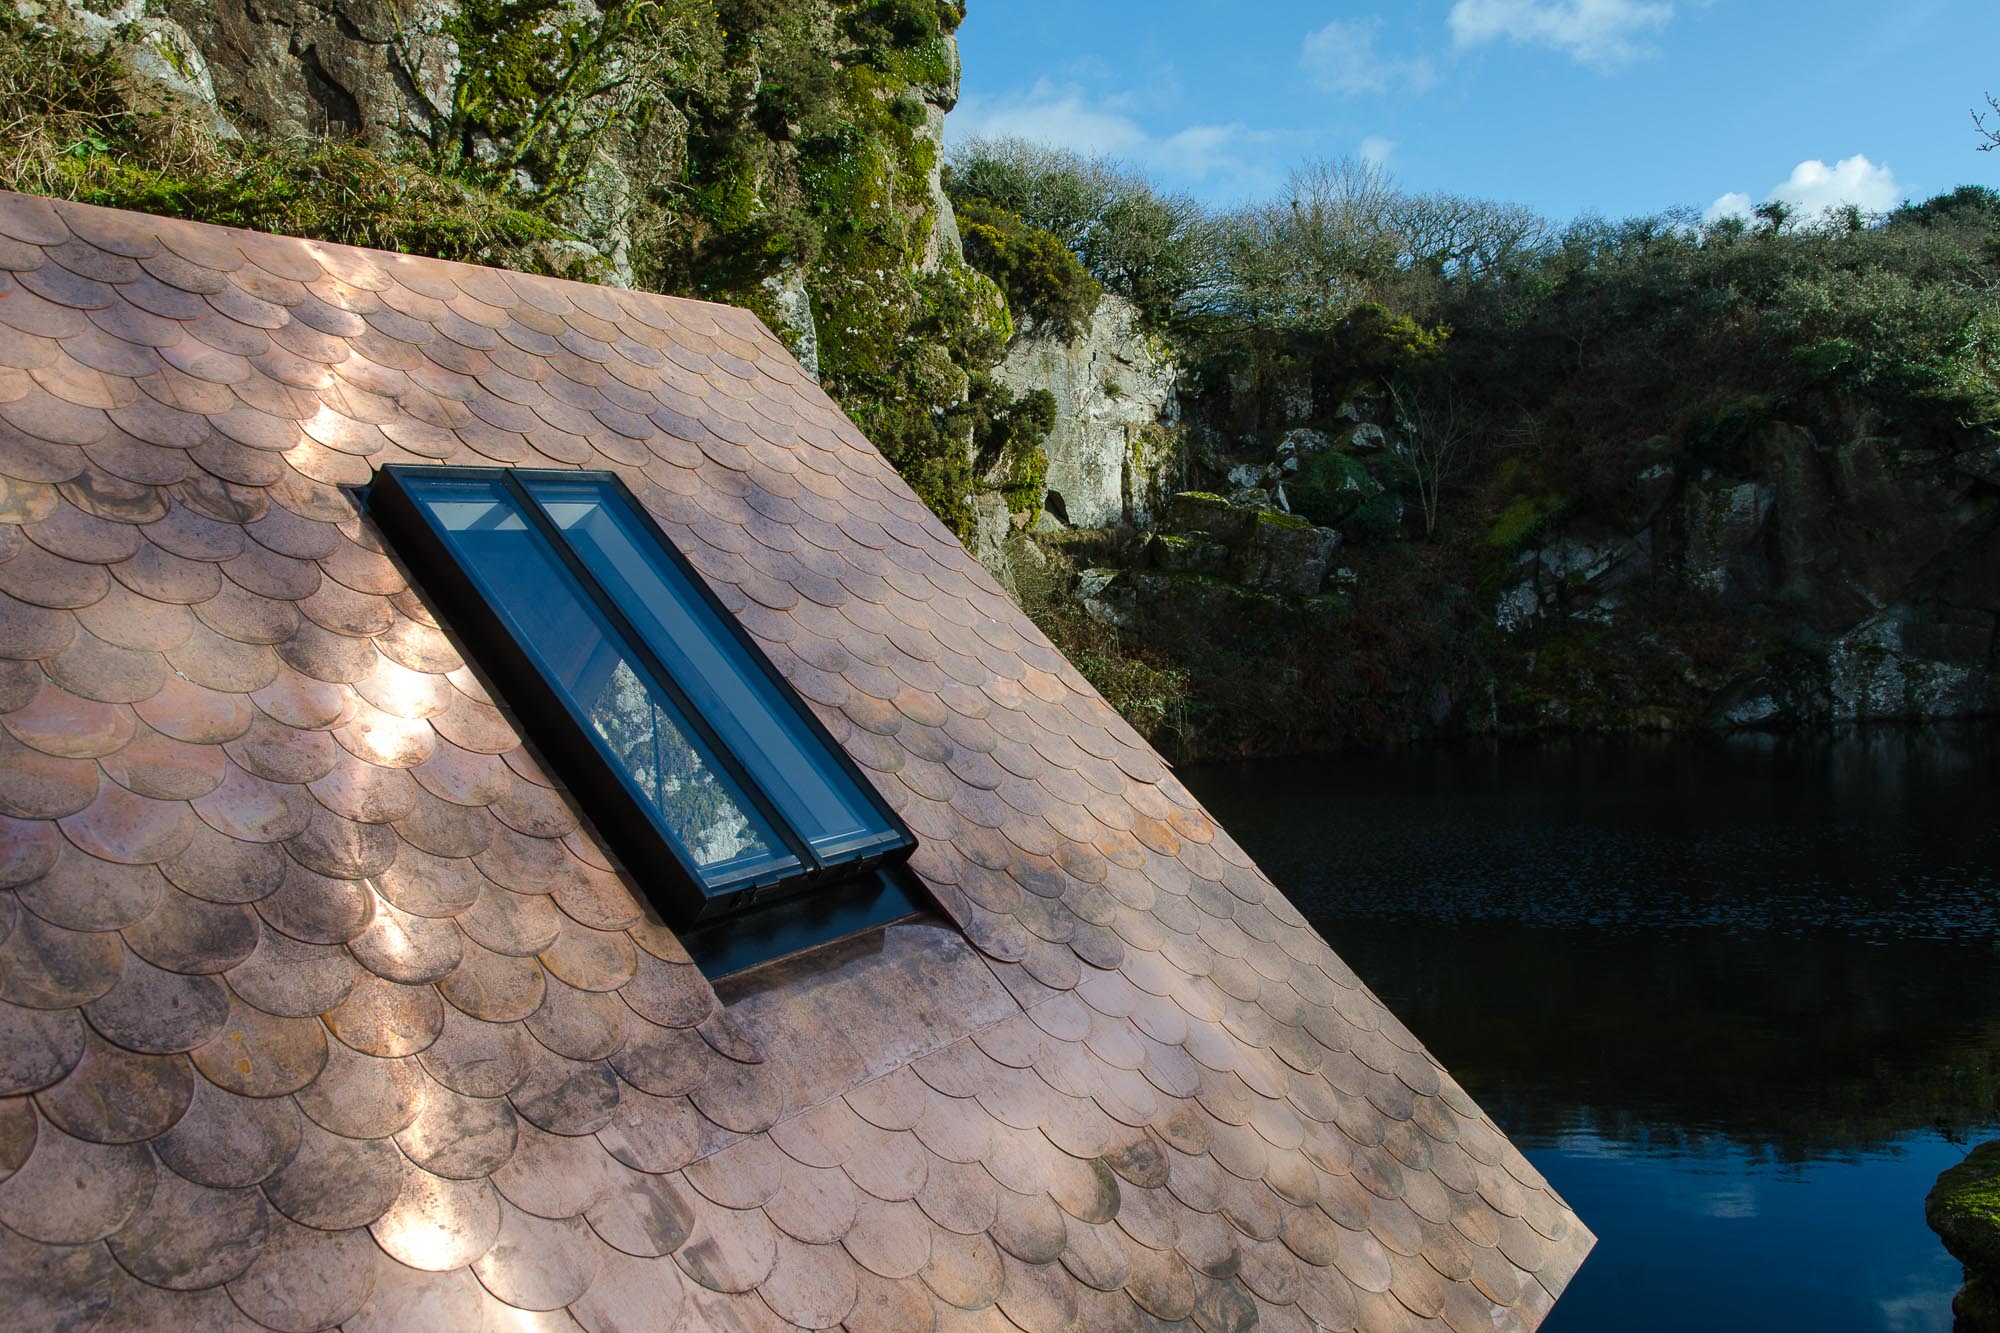 sauna cabin copper fish scale tiles overlooking quarry and water